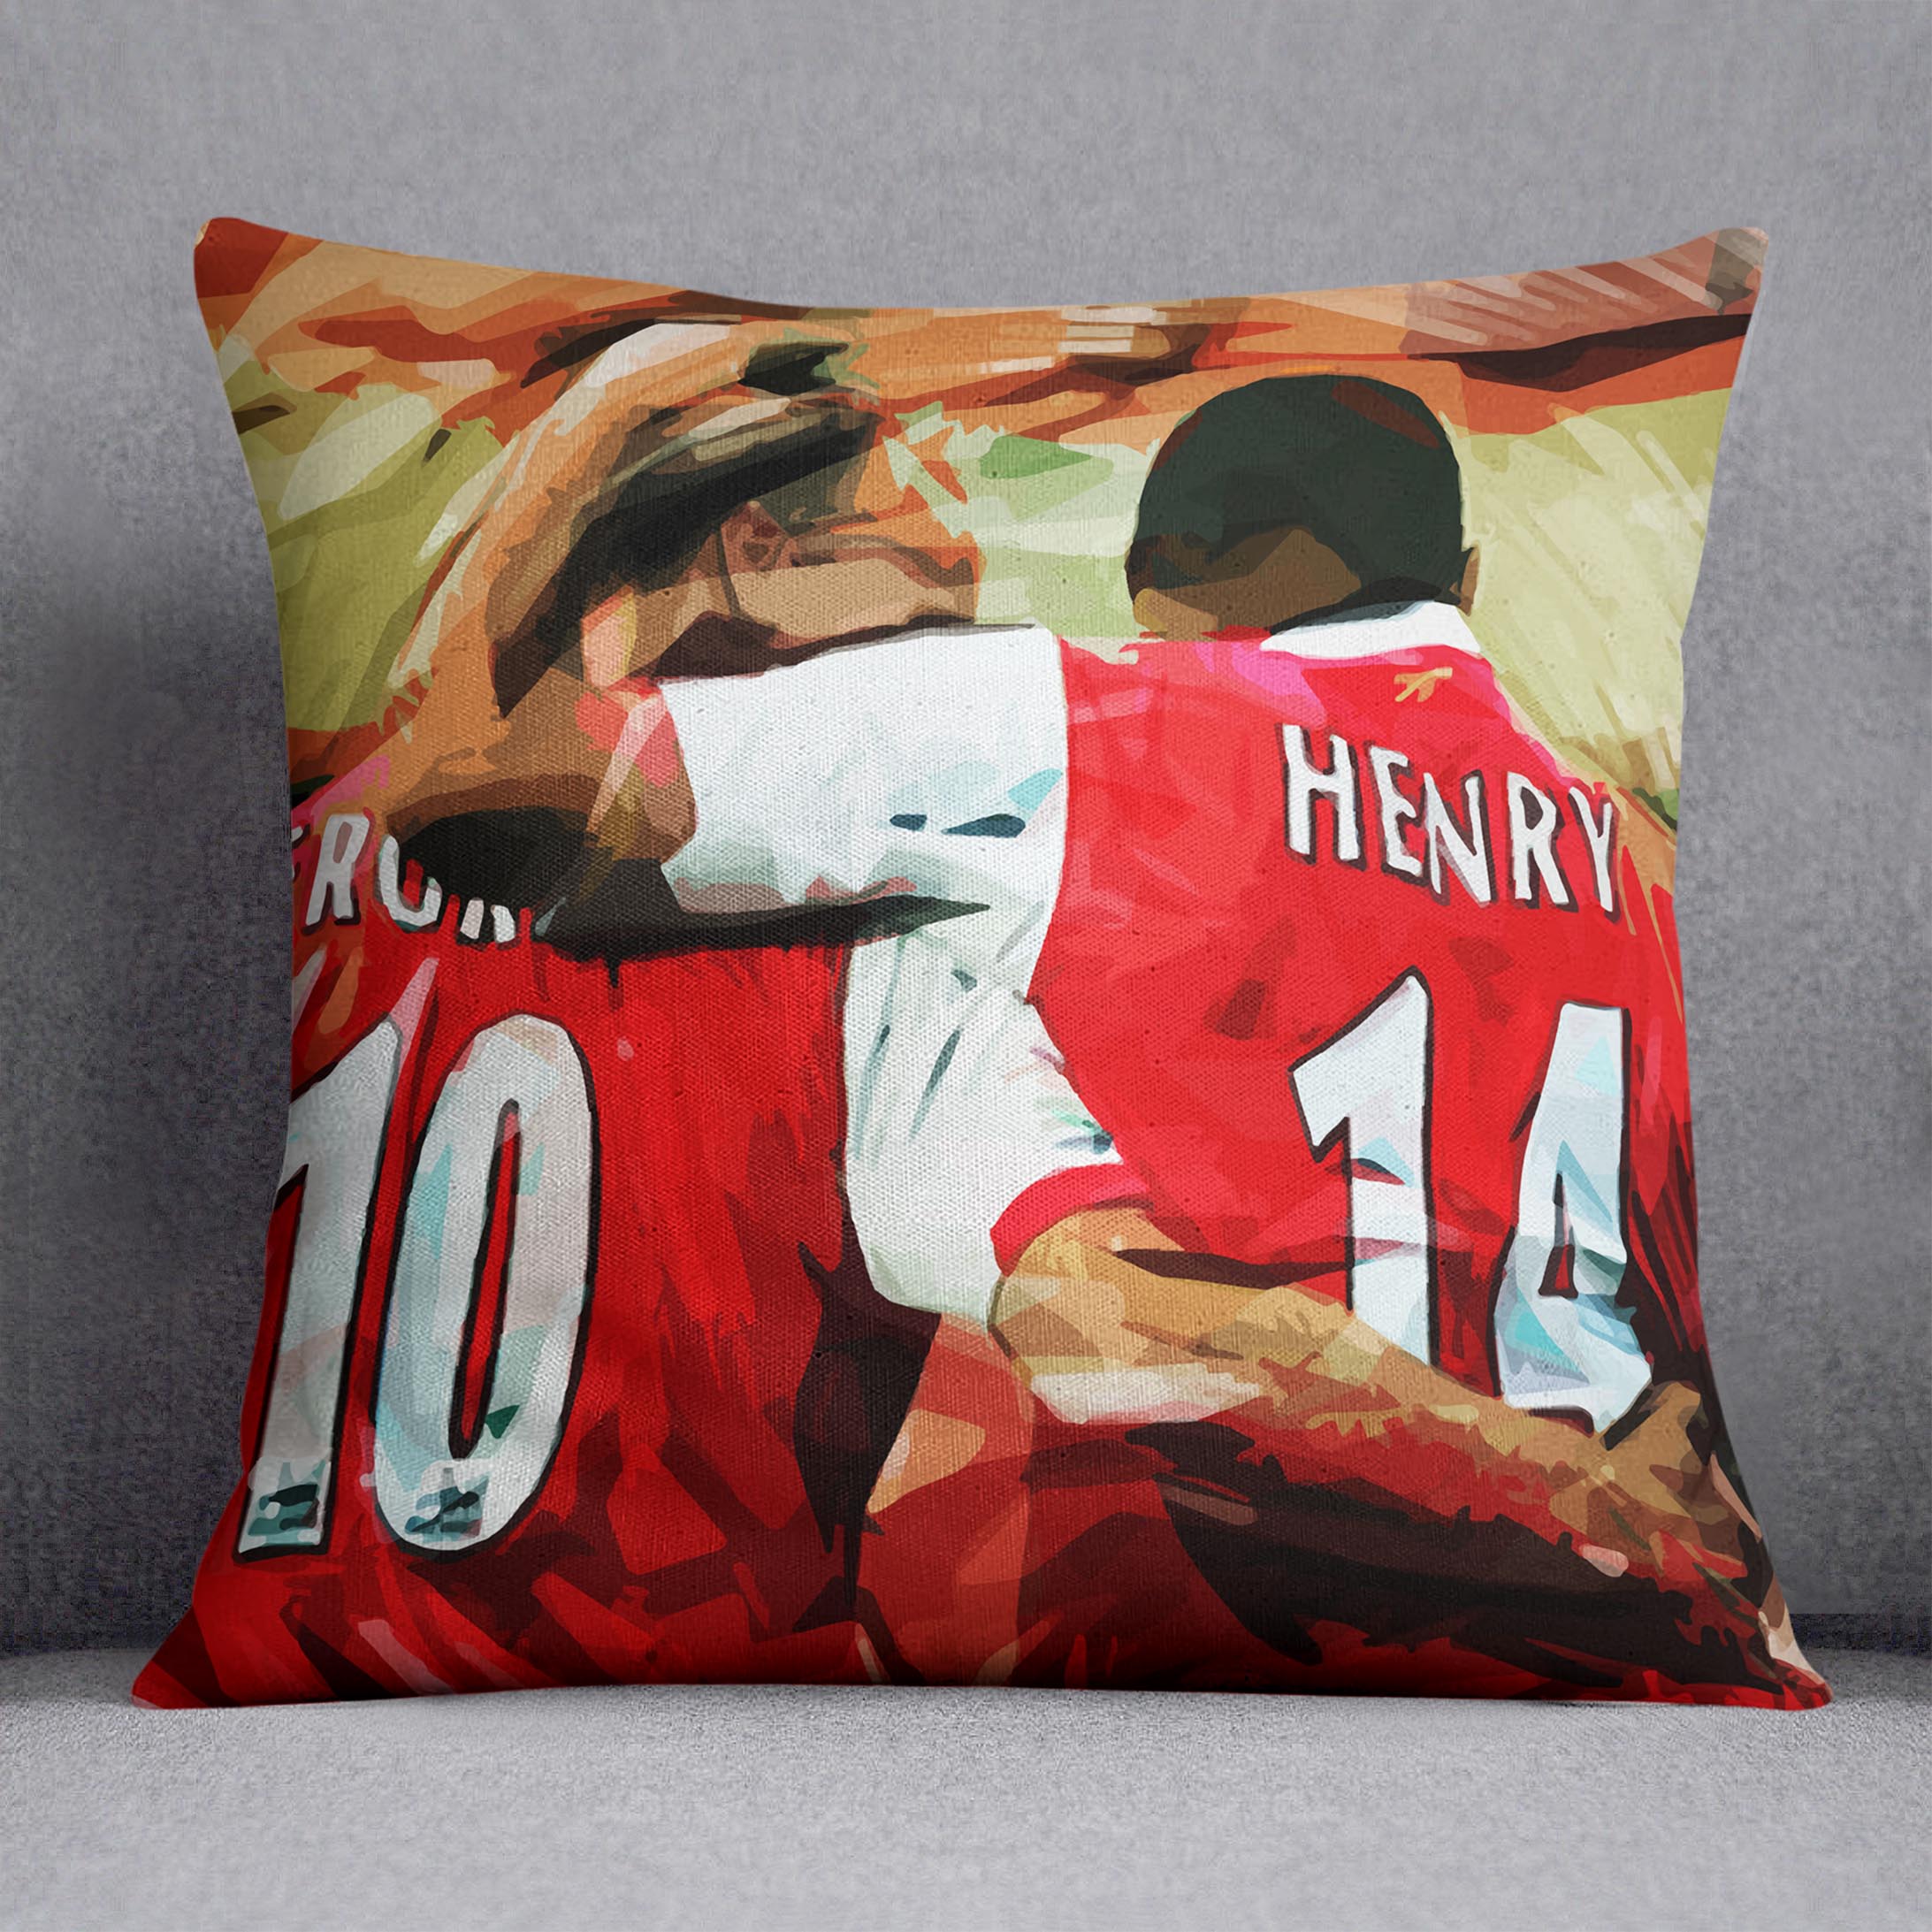 Dennis Bergkamp and Thierry Henry Cushion